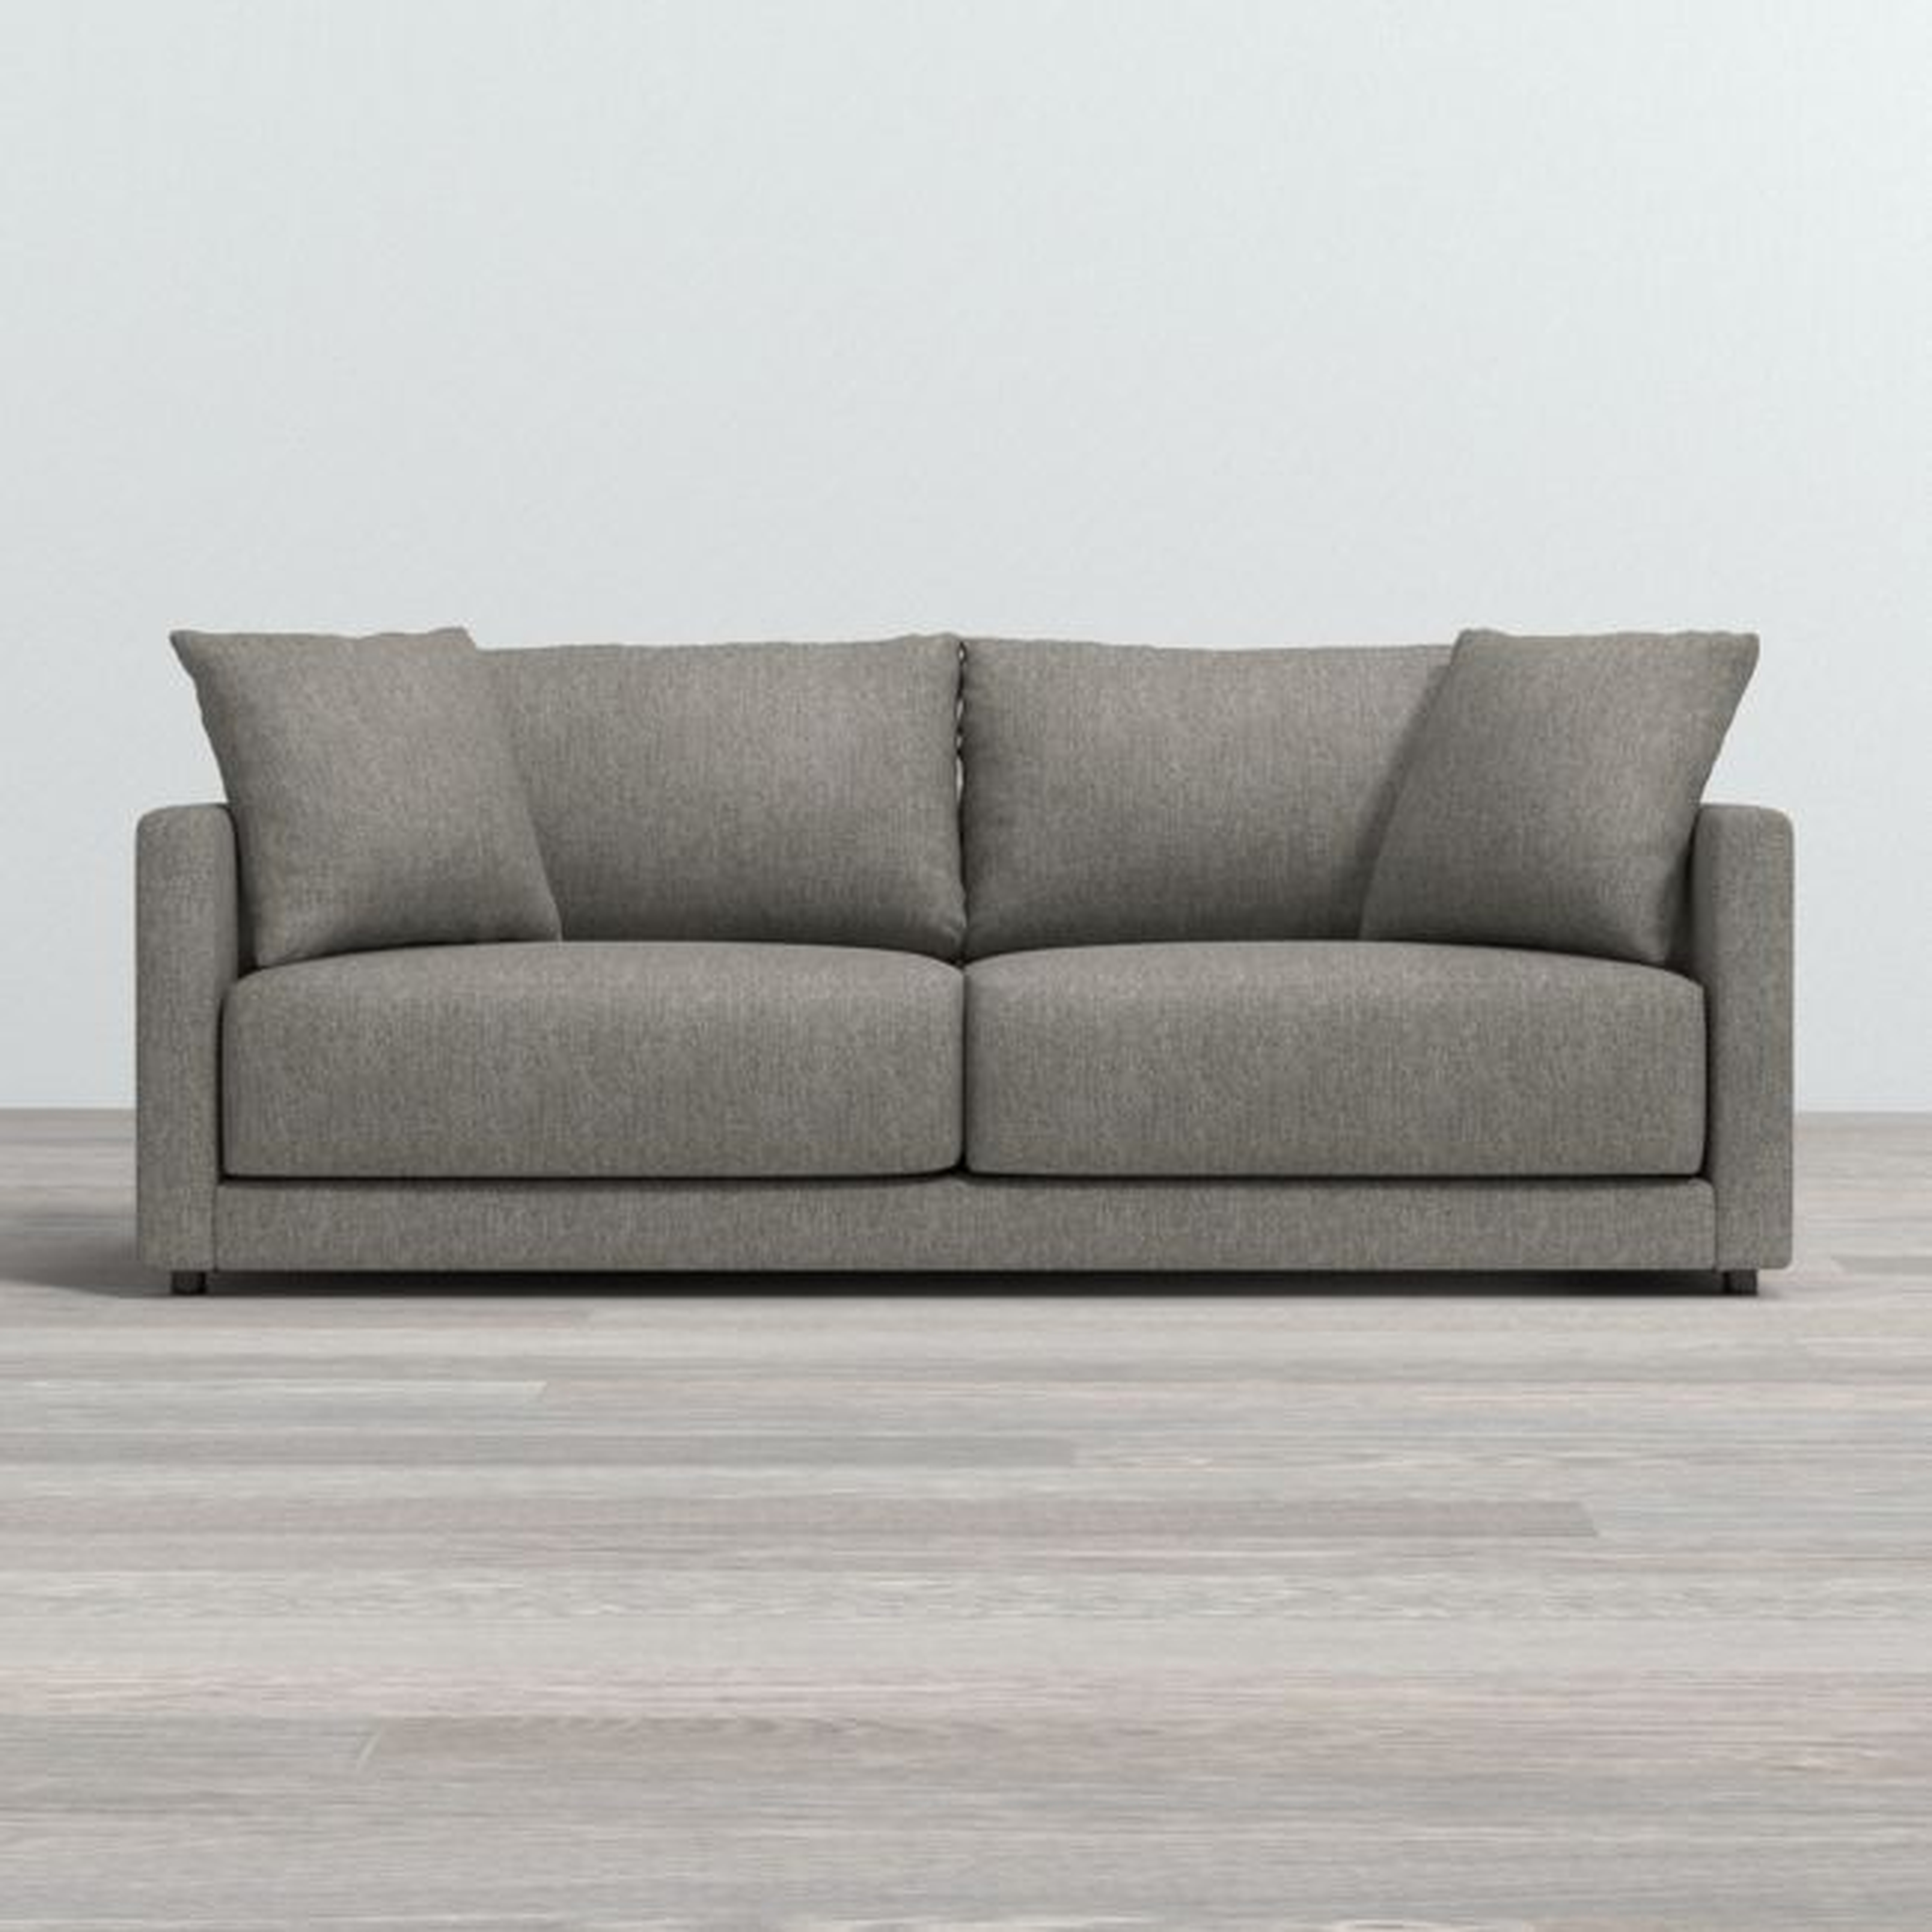 Gather Sofa - Crate and Barrel